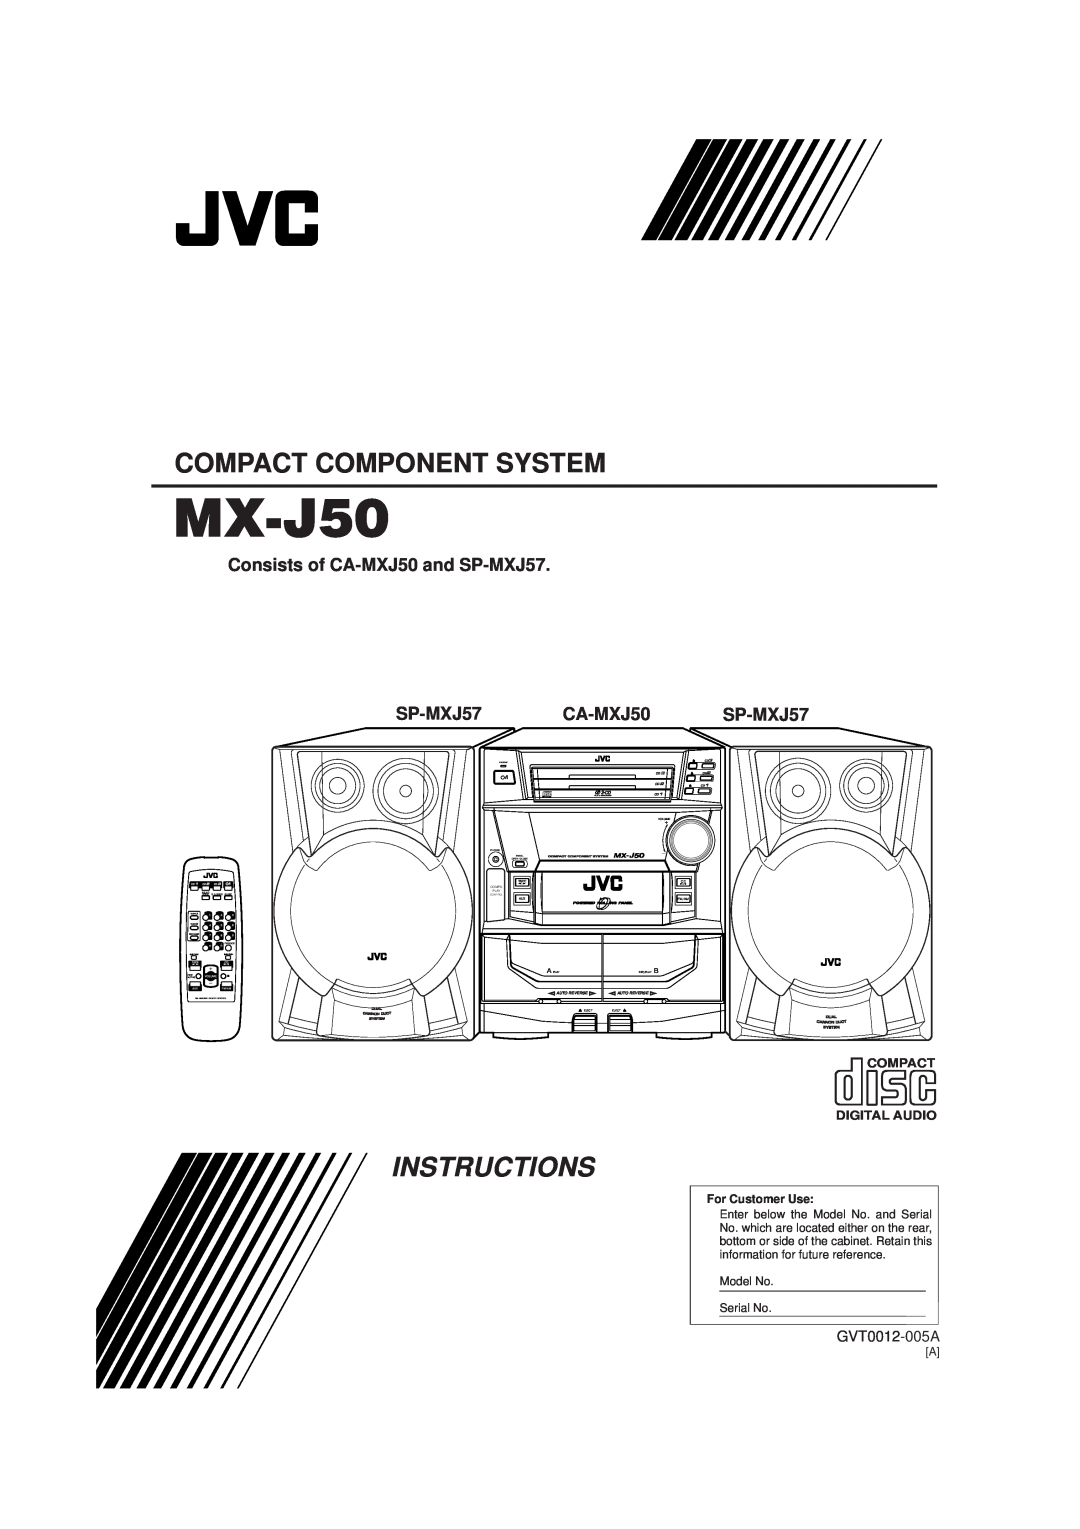 JVC MX-J50 manual Instructions, Consists of CA-MXJ50and SP-MXJ57, Compact Component System, GVT0012-005A, For Customer Use 